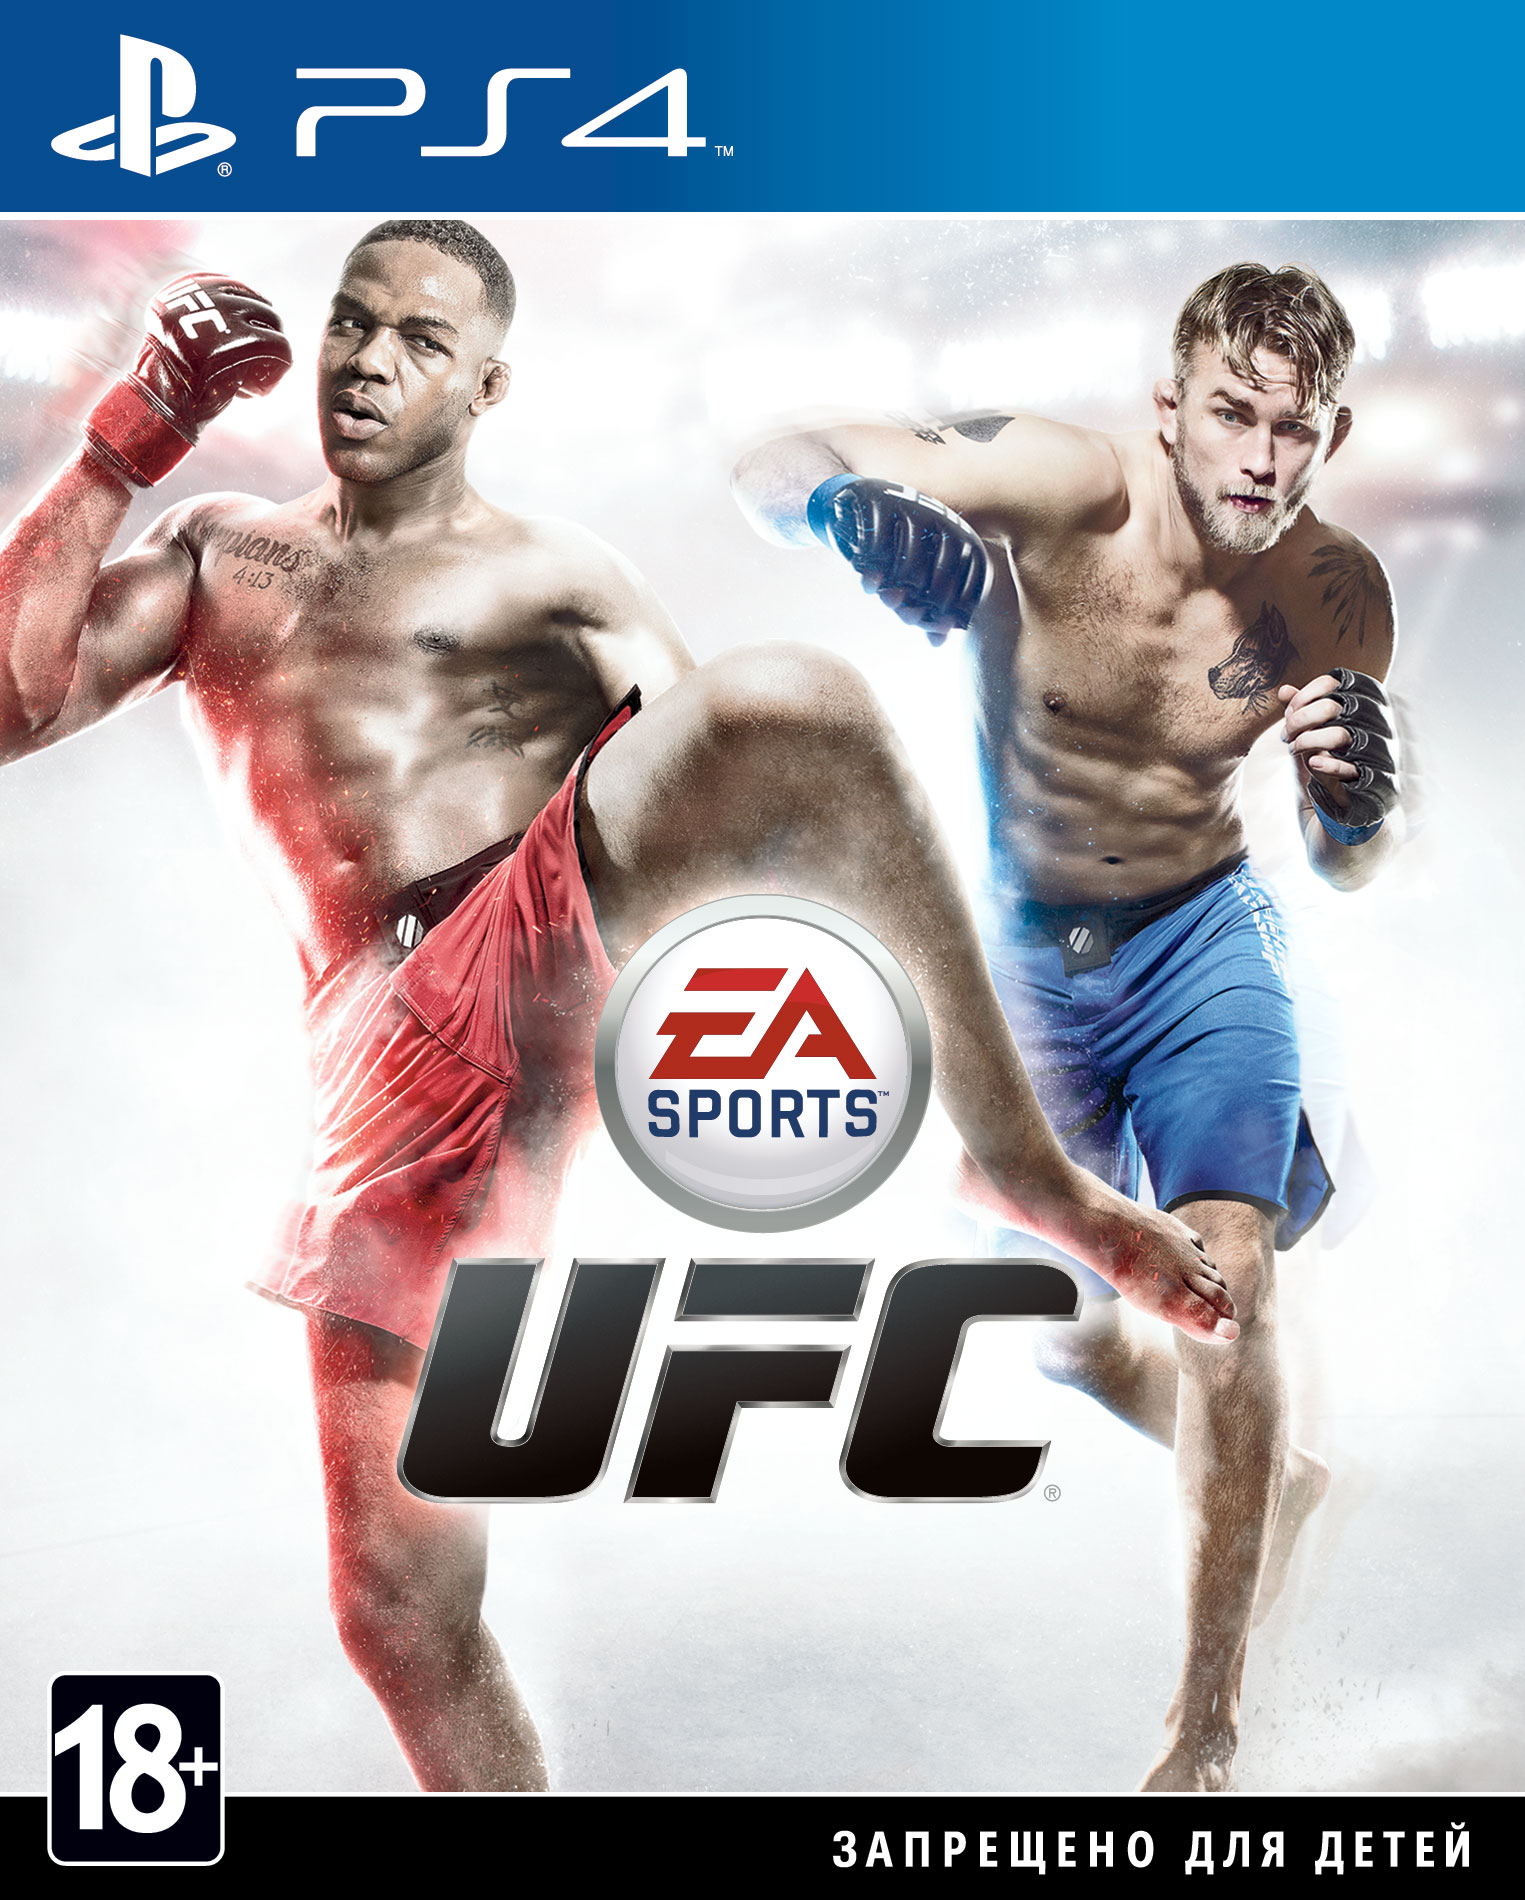 EA SPORTS UFC (PS4) (GameReplay)